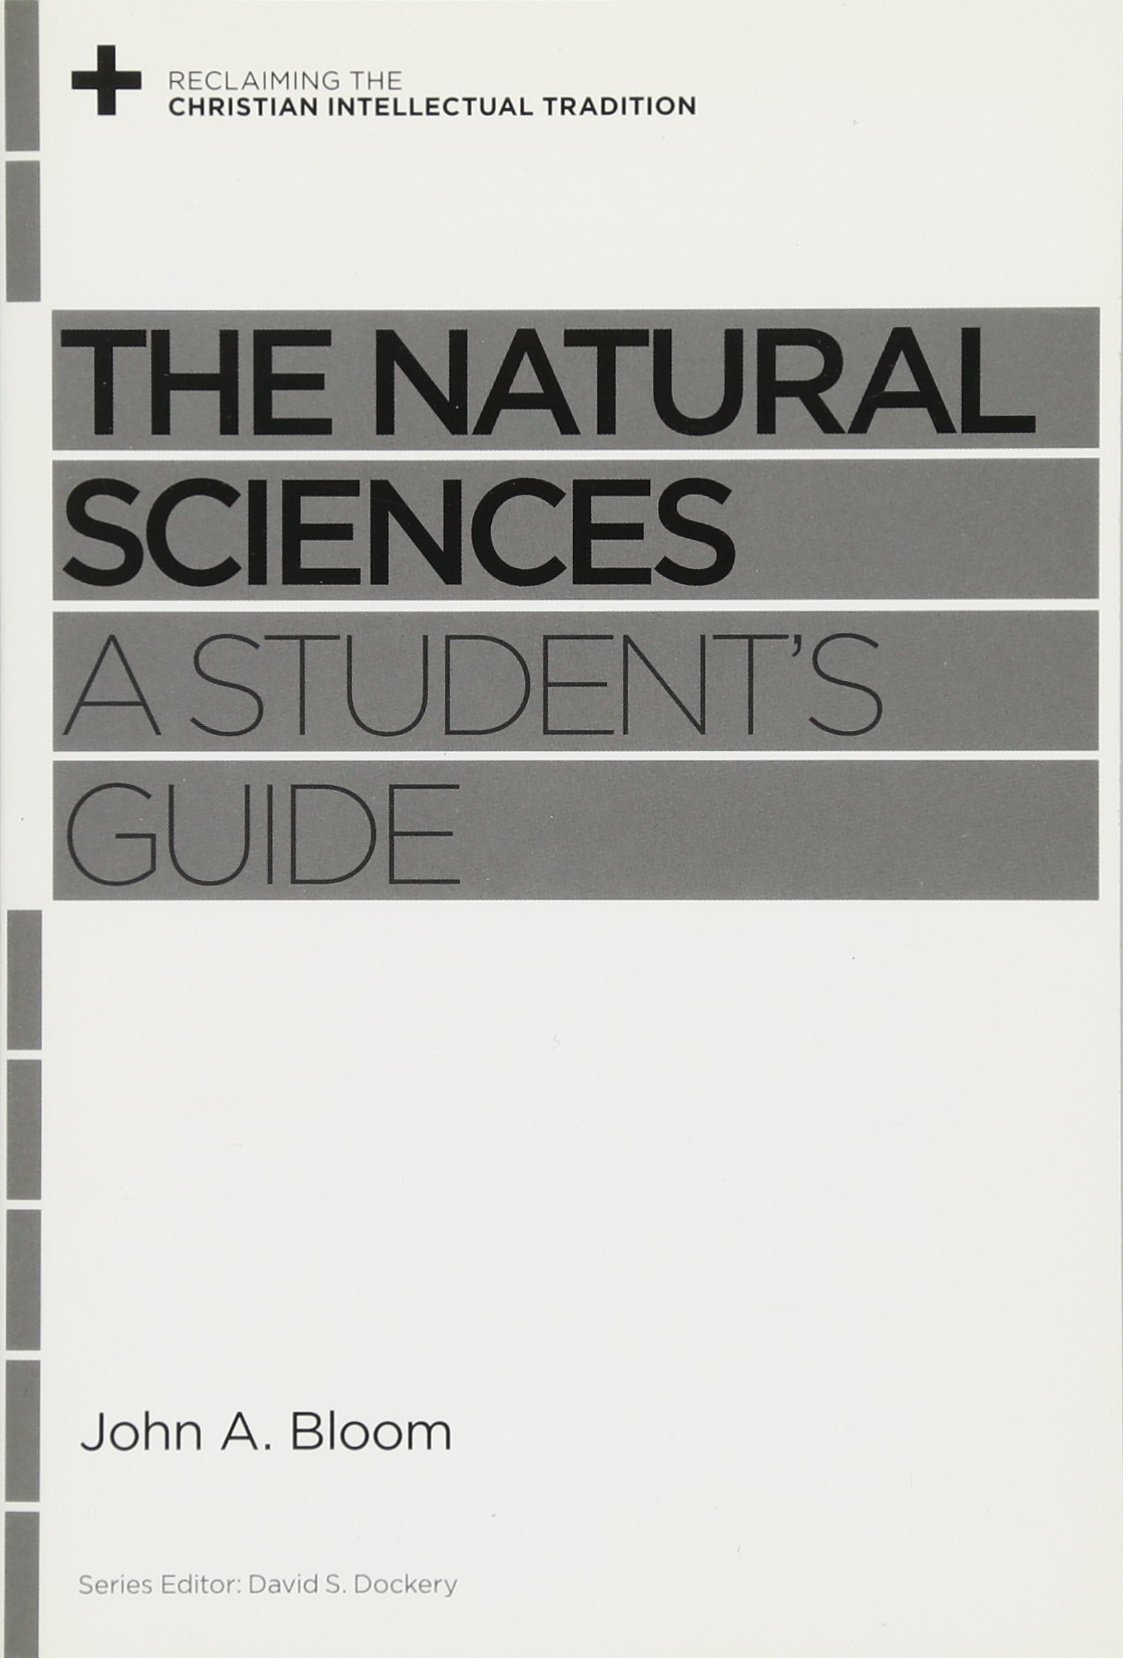 The Natural Sciences: A Student's Guide (Reclaiming the Christian Intellectual Tradition)